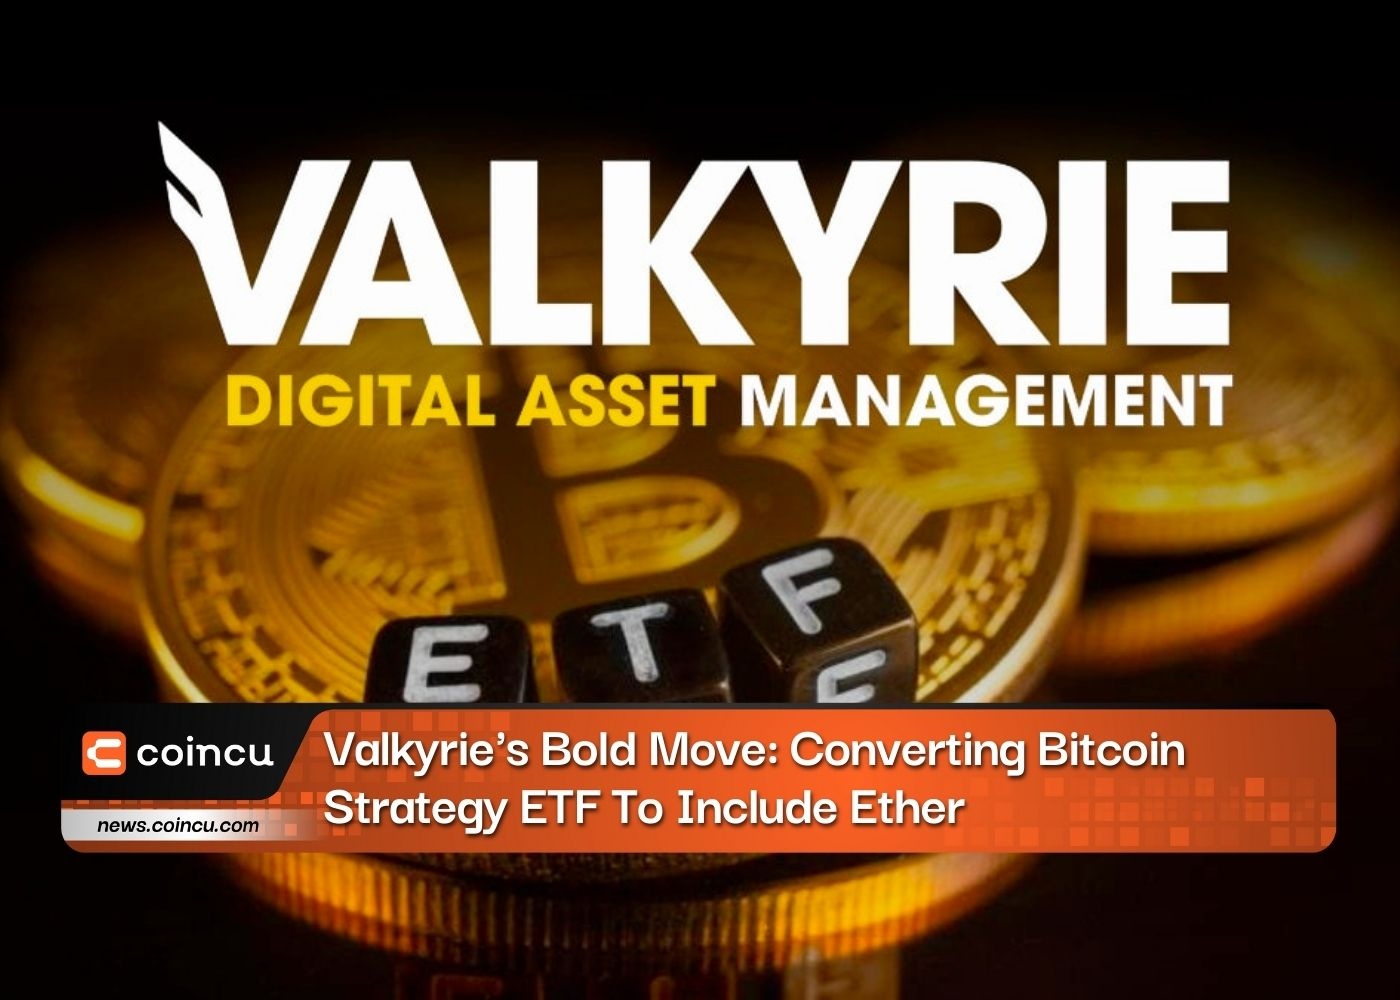 Valkyrie's Bold Move: Converting Bitcoin Strategy ETF To Include Ether